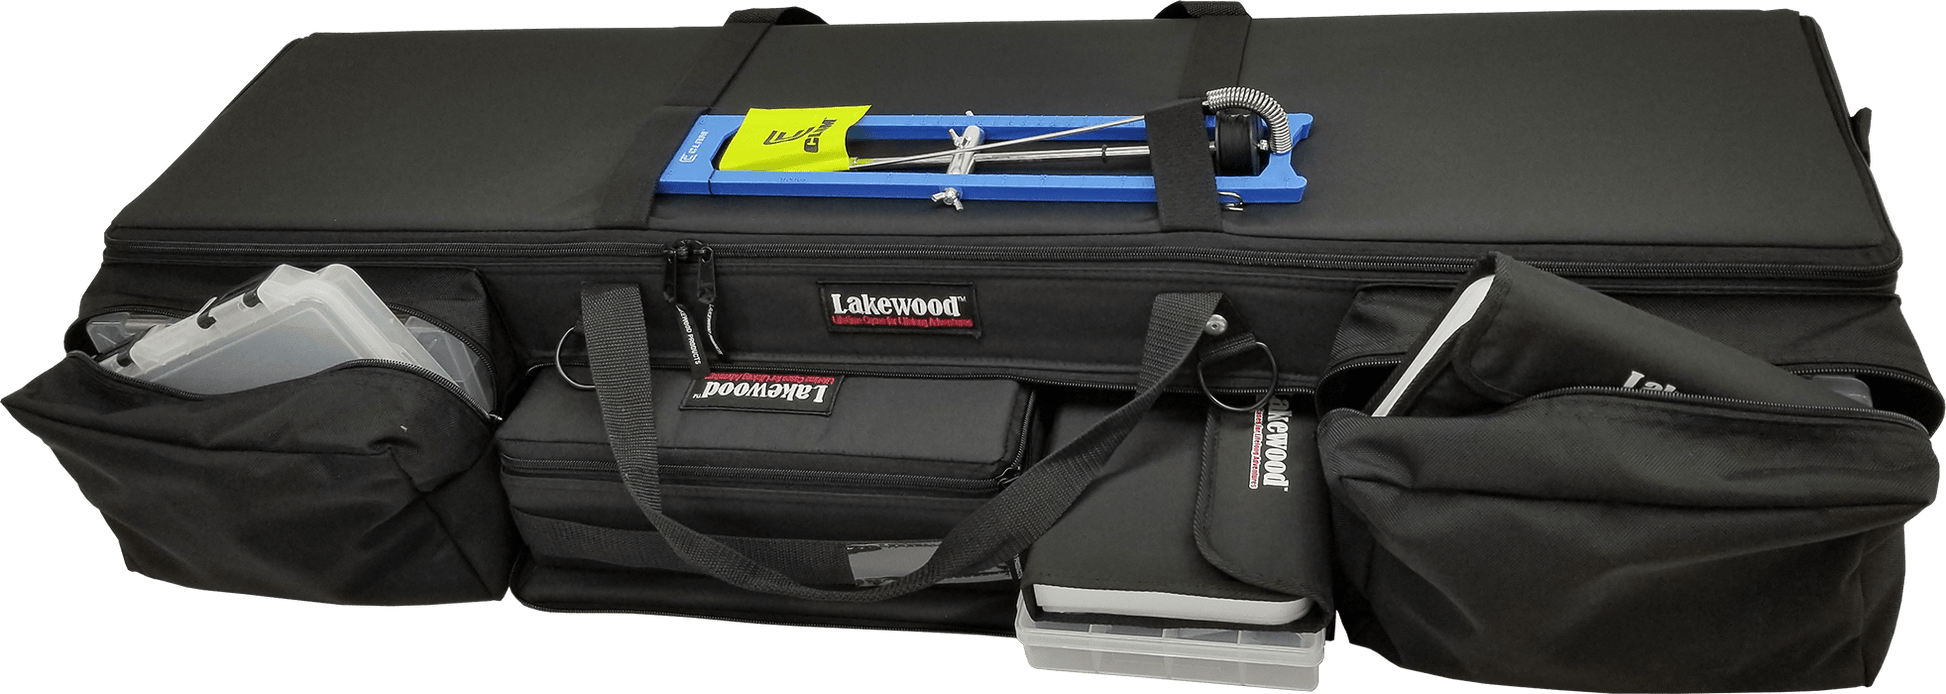 Lakewood Products - The Greenback - Angler's Pro Tackle & Outdoors